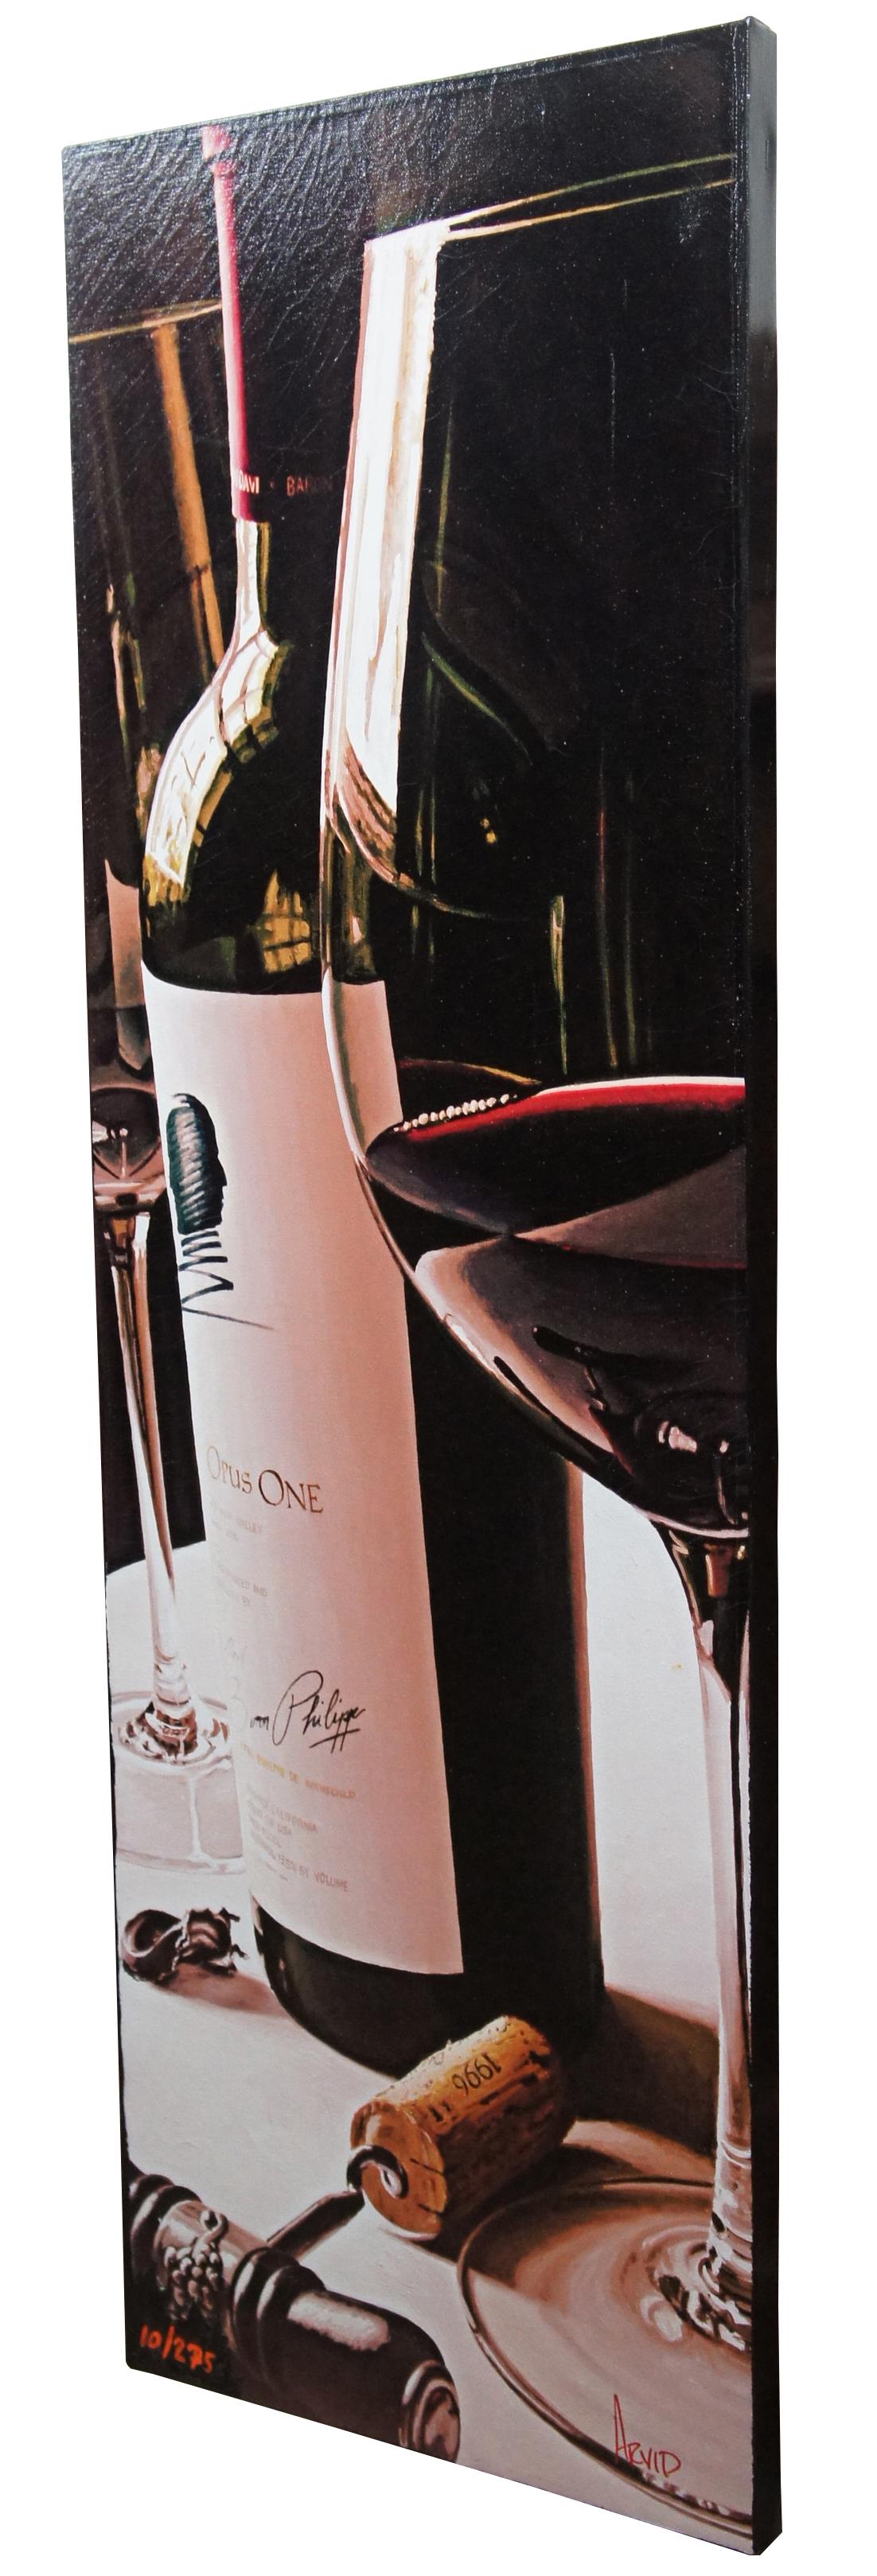 America’s Bordeaux by Thomas Arvid – Signed and numbered 10/275 giclee print on canvas; still life featuring a wine bottle, two glasses and a corkscrew. Thomas Arvid is known for his detailed paintings of oversized still life of wine and the rituals